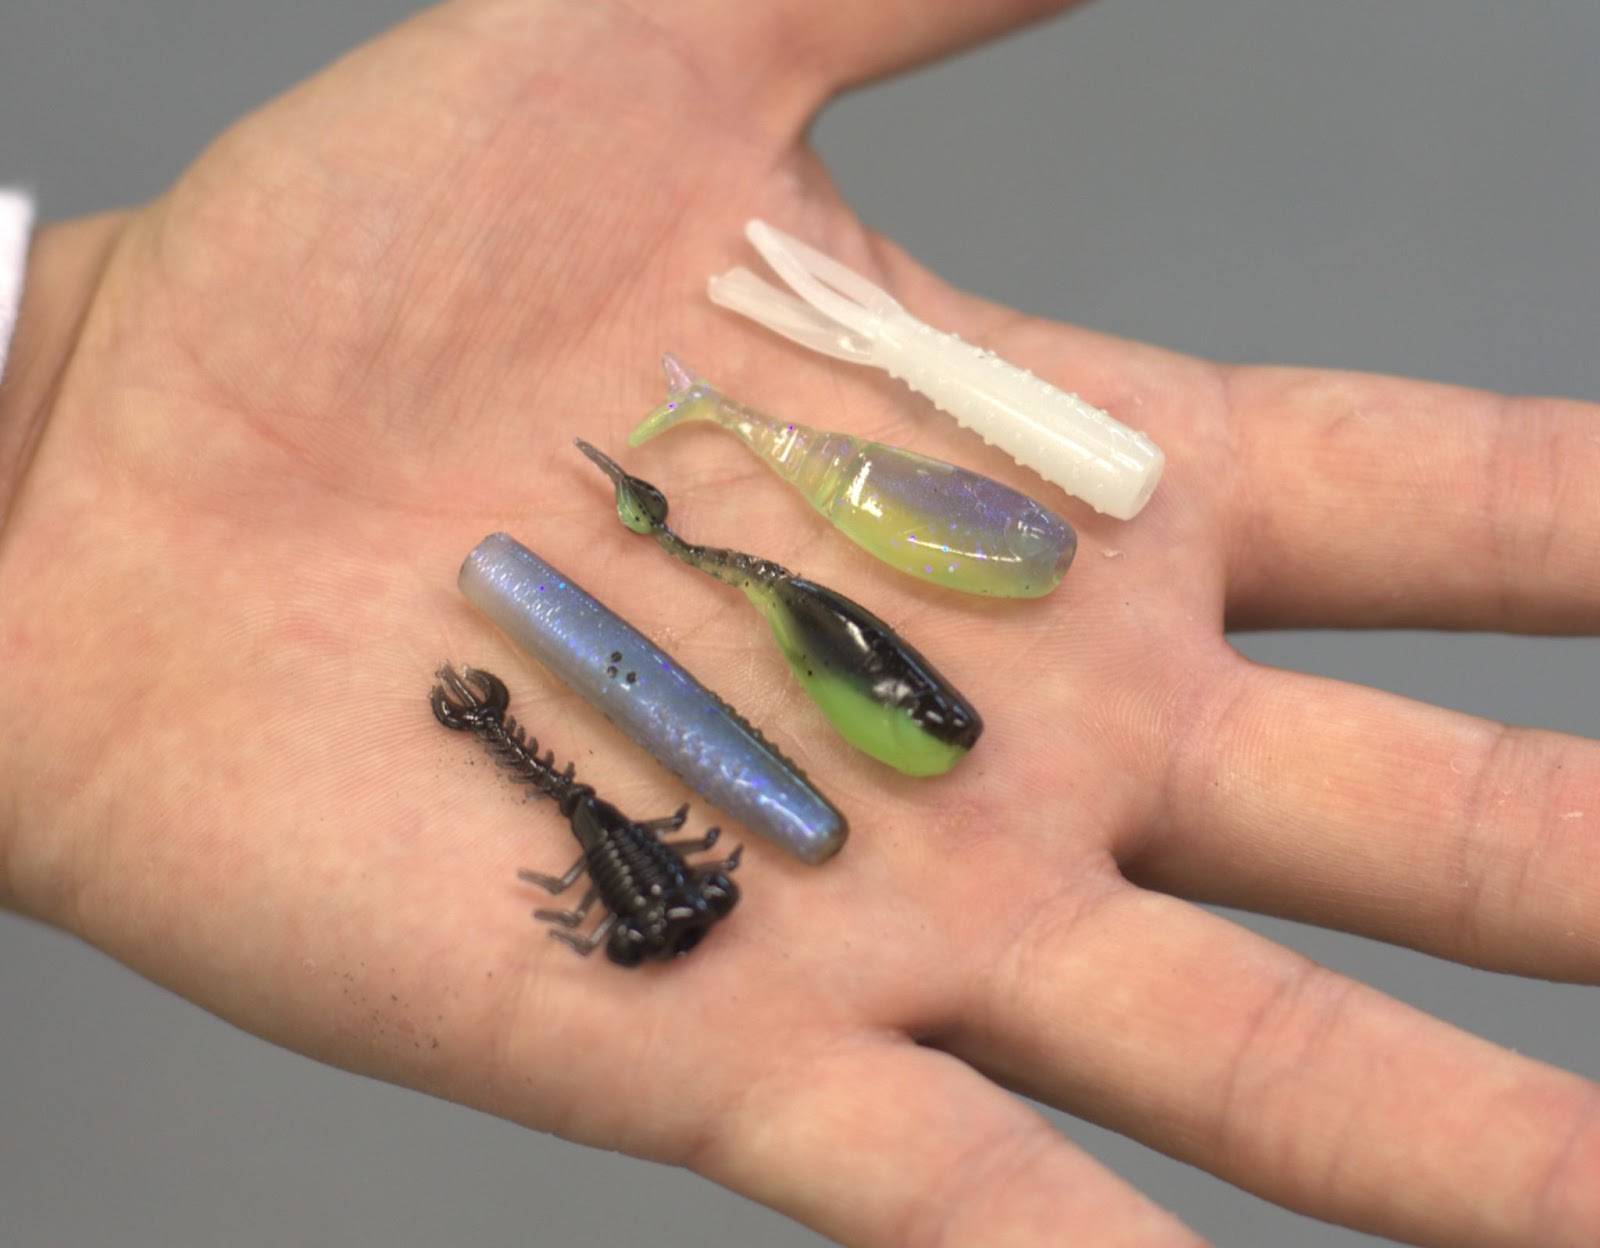 BUYER'S GUIDE: BFS (Bait Finesse System) Rods, Reels, And Lures